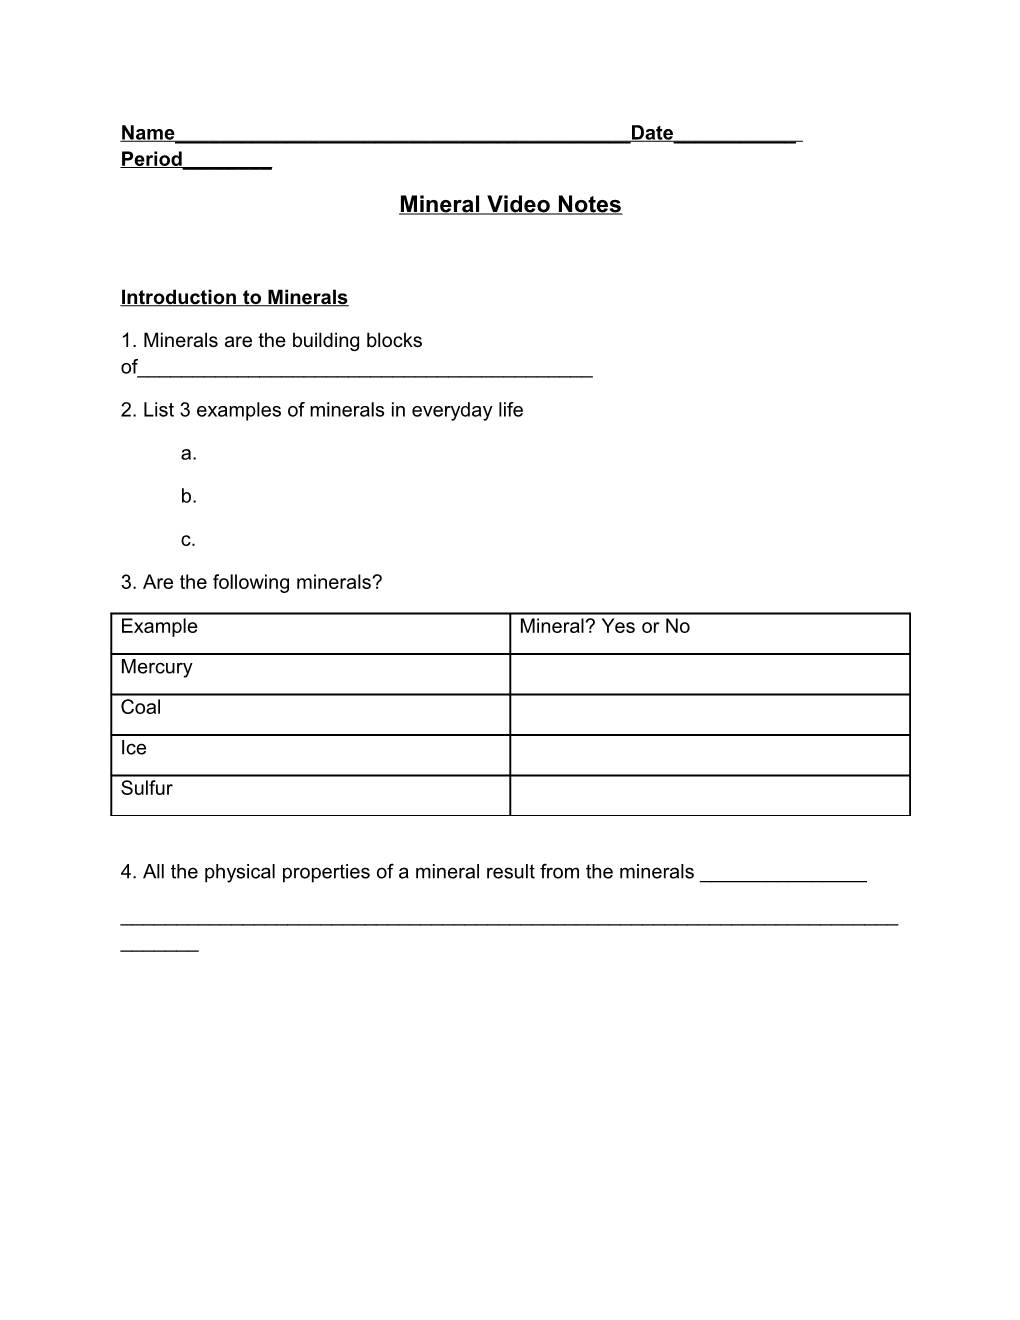 Mineral Video Notes